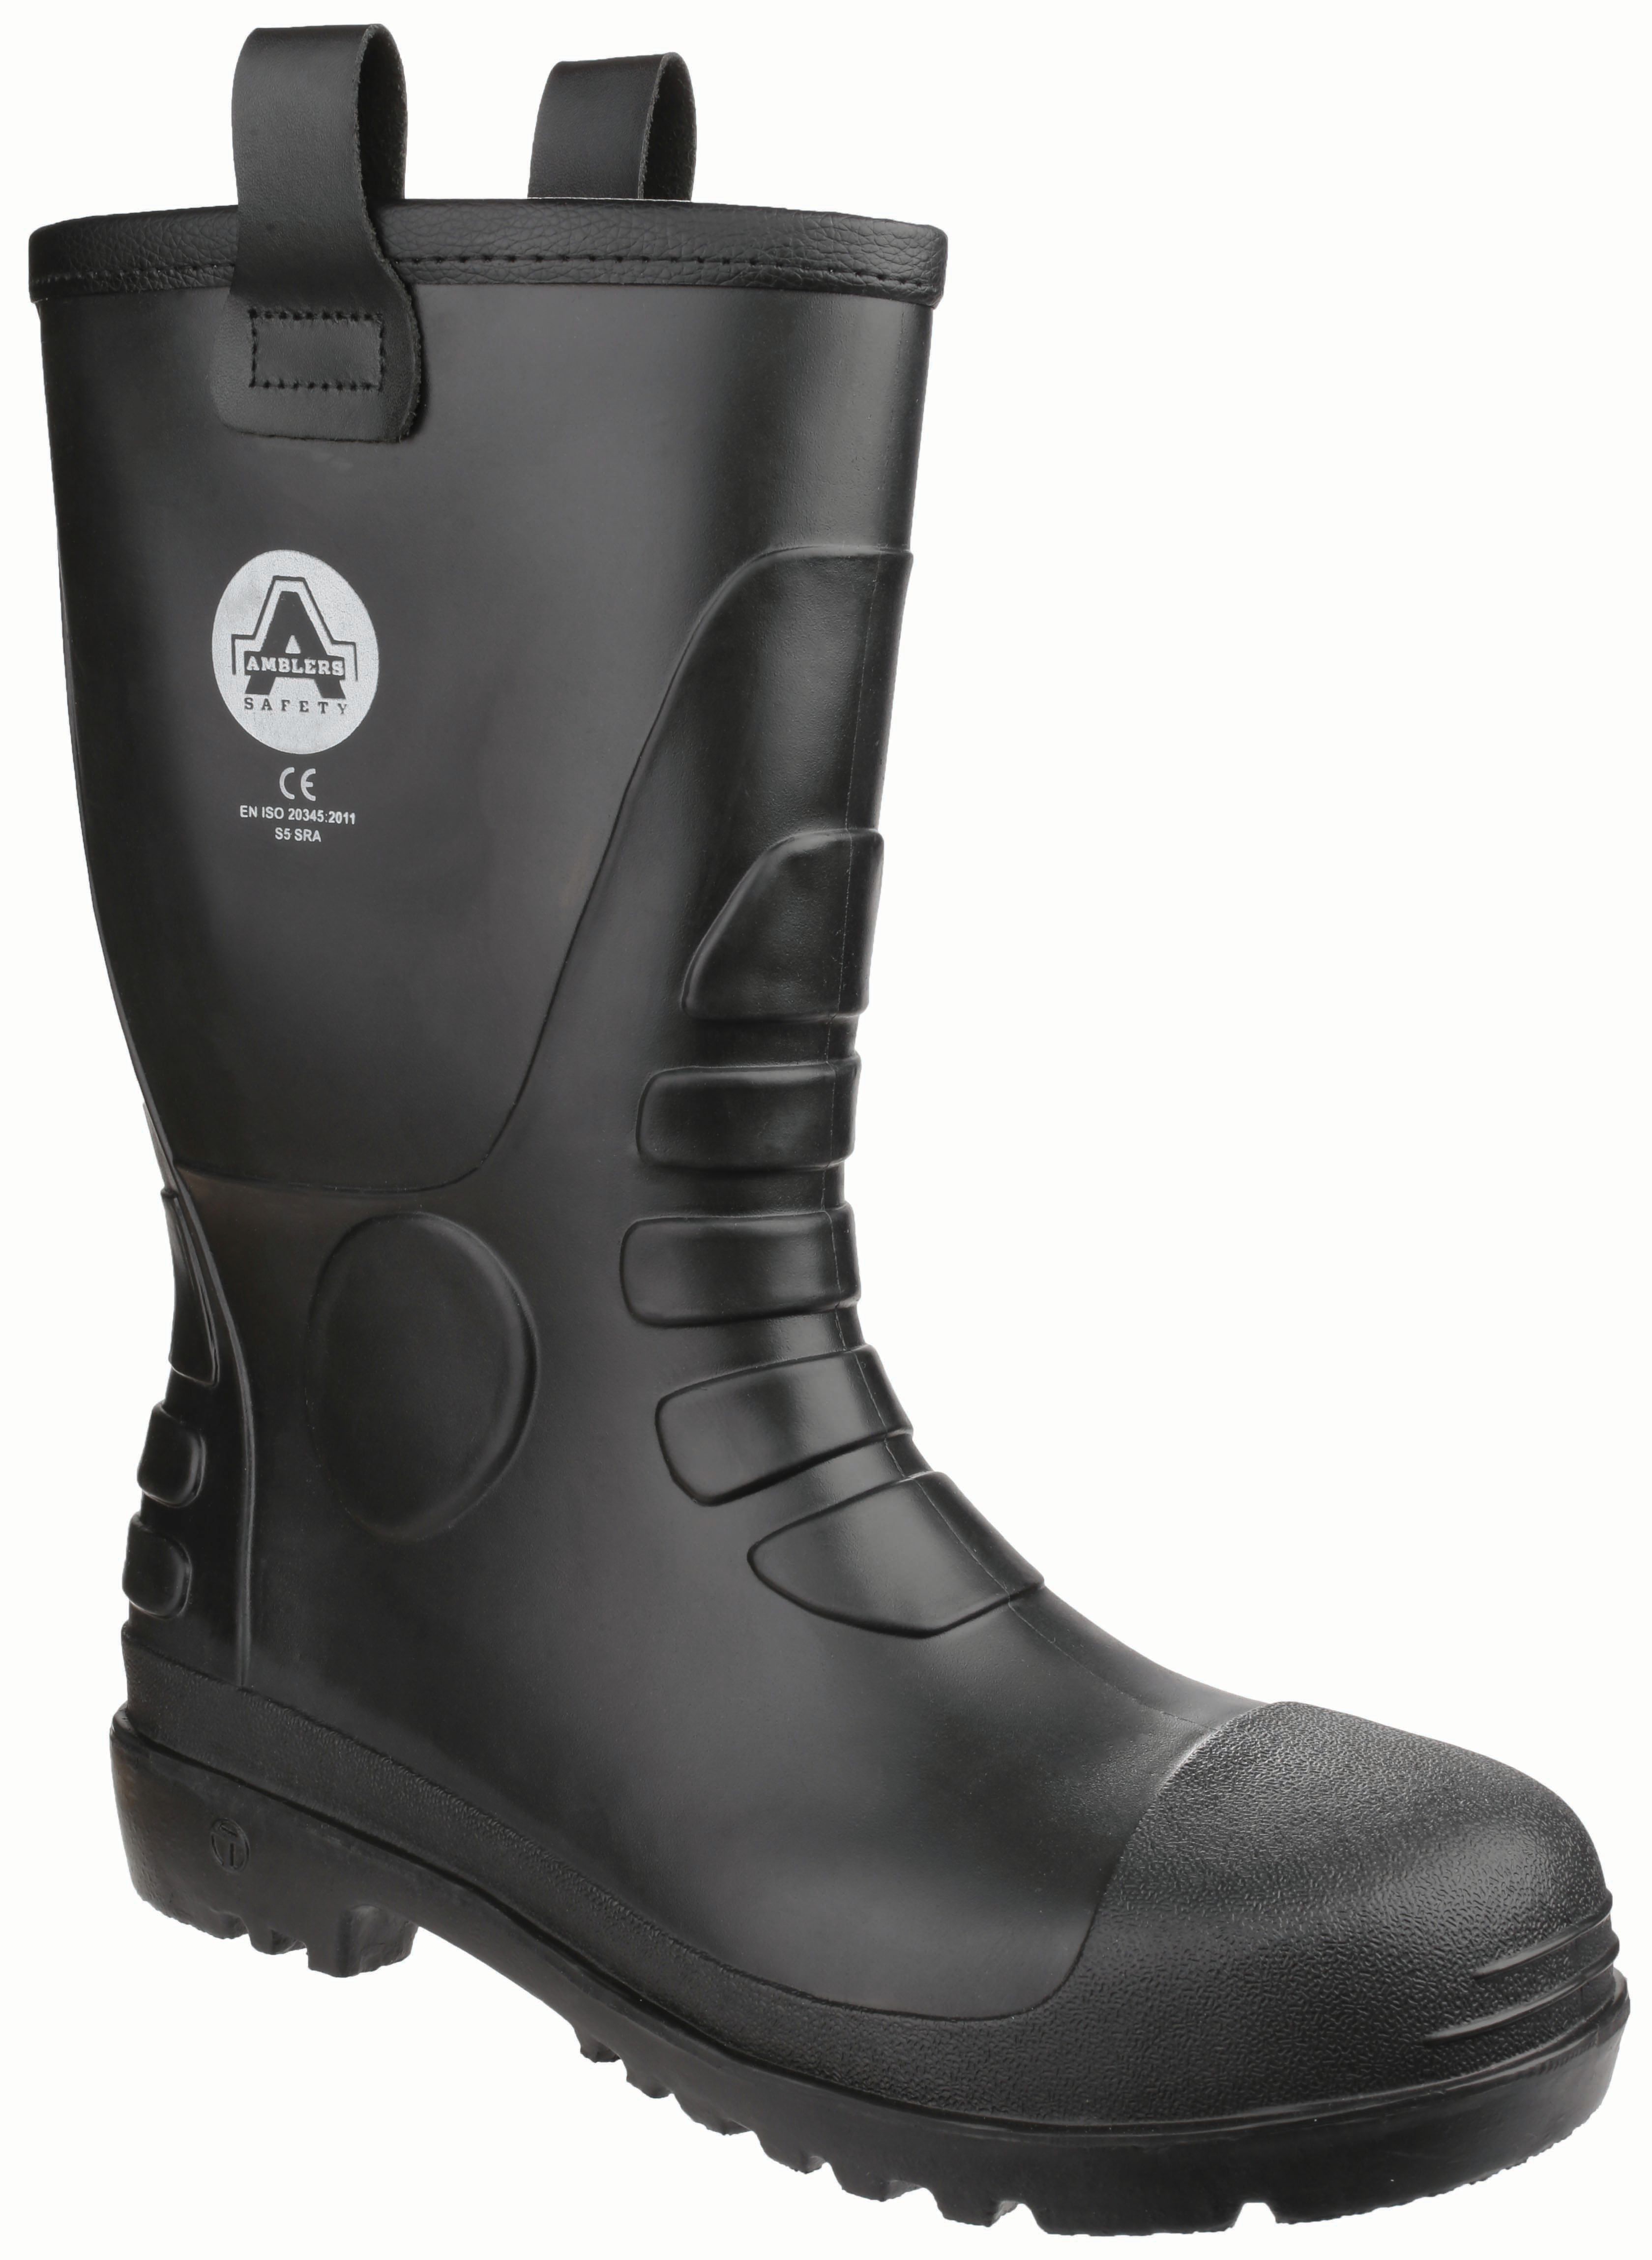 Image of Amblers Safety FS90 Rigger Safety Boot - Black Size 9